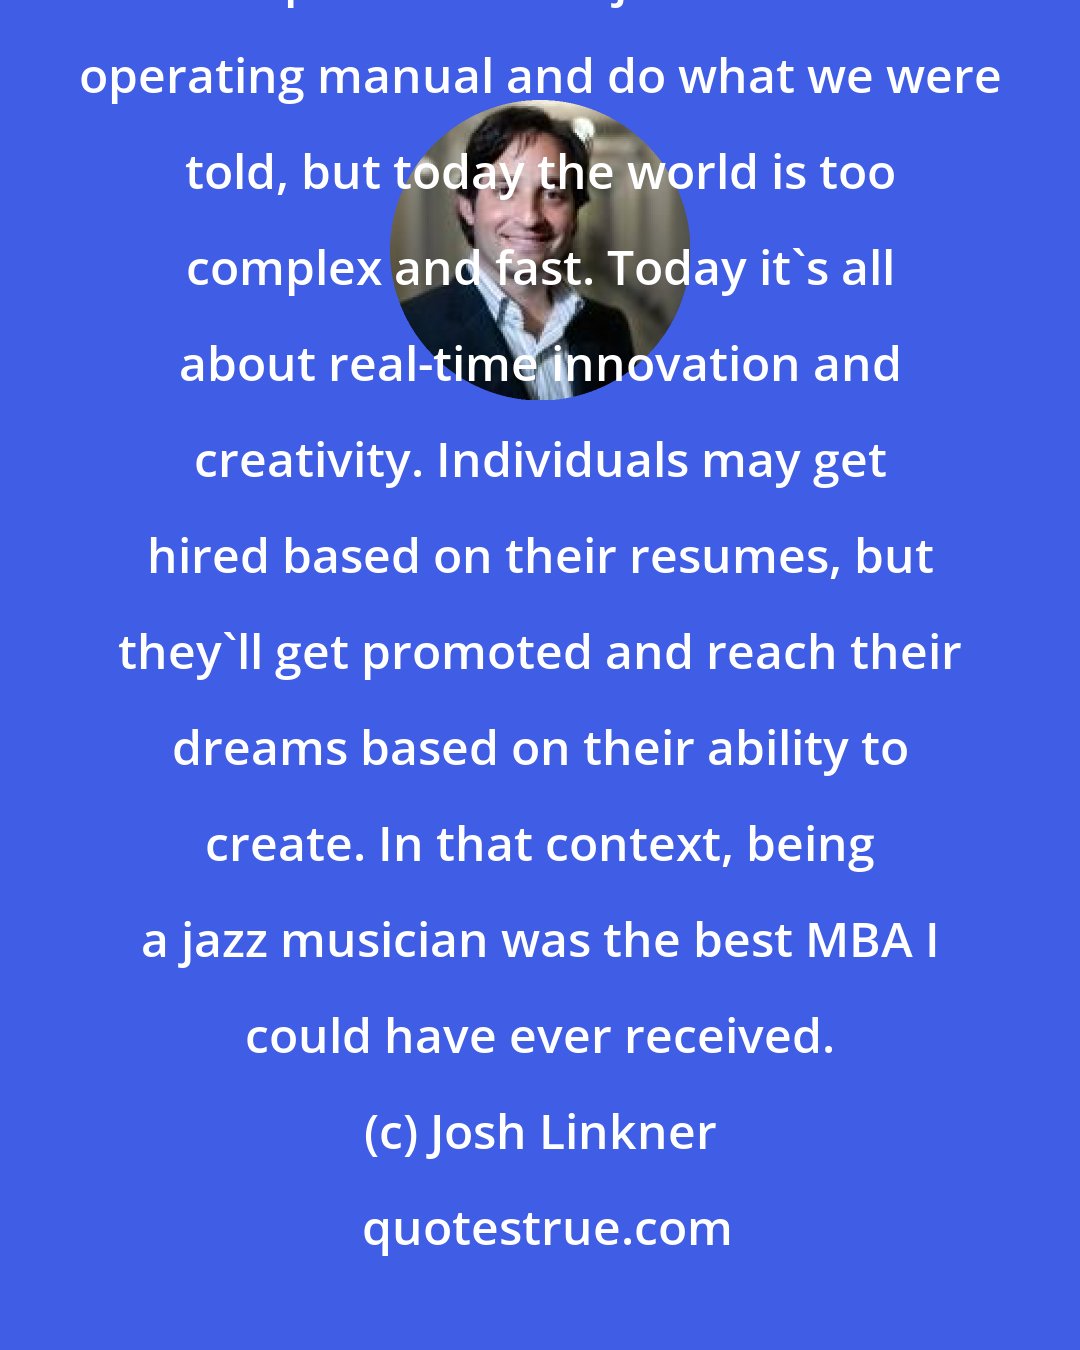 Josh Linkner: Business today is all about improvisation, which is the essence of jazz. Perhaps in the past we could just follow the operating manual and do what we were told, but today the world is too complex and fast. Today it's all about real-time innovation and creativity. Individuals may get hired based on their resumes, but they'll get promoted and reach their dreams based on their ability to create. In that context, being a jazz musician was the best MBA I could have ever received.